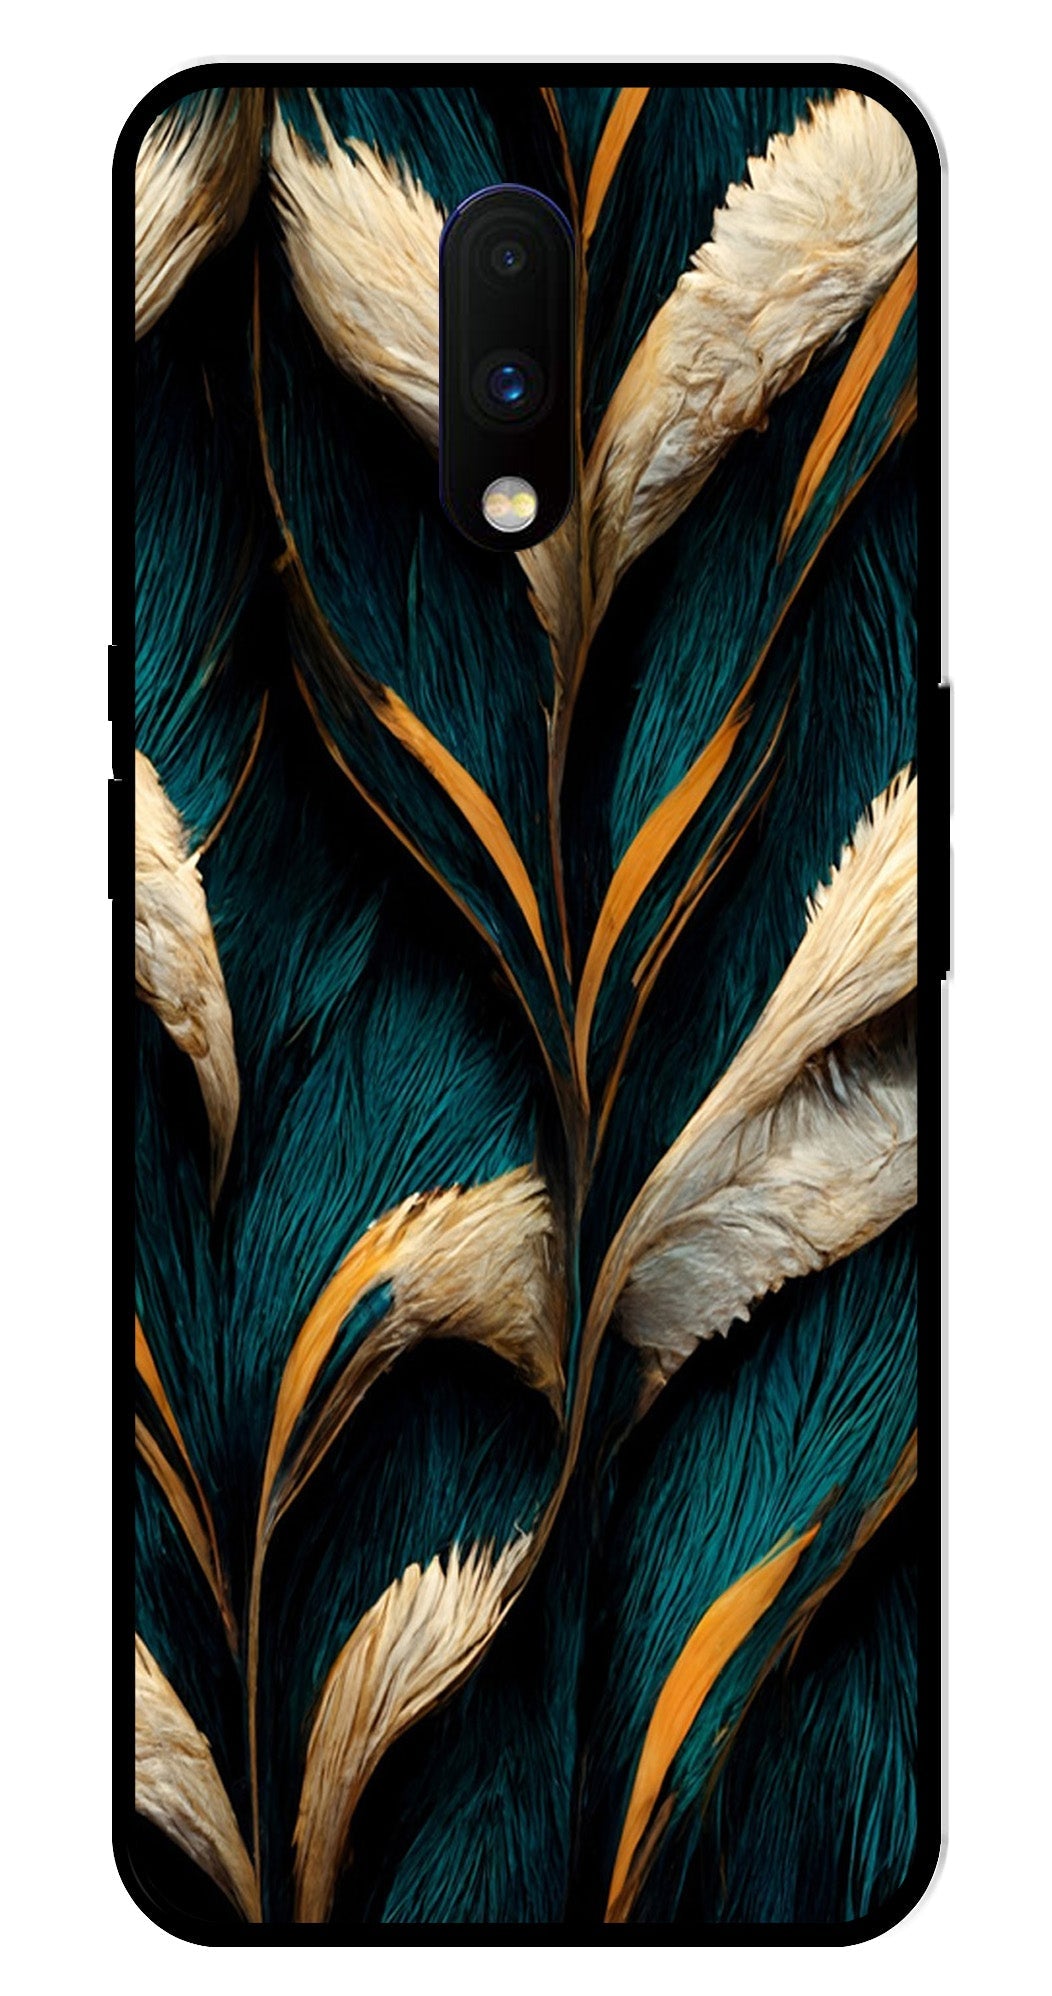 Feathers Metal Mobile Case for OnePlus 7